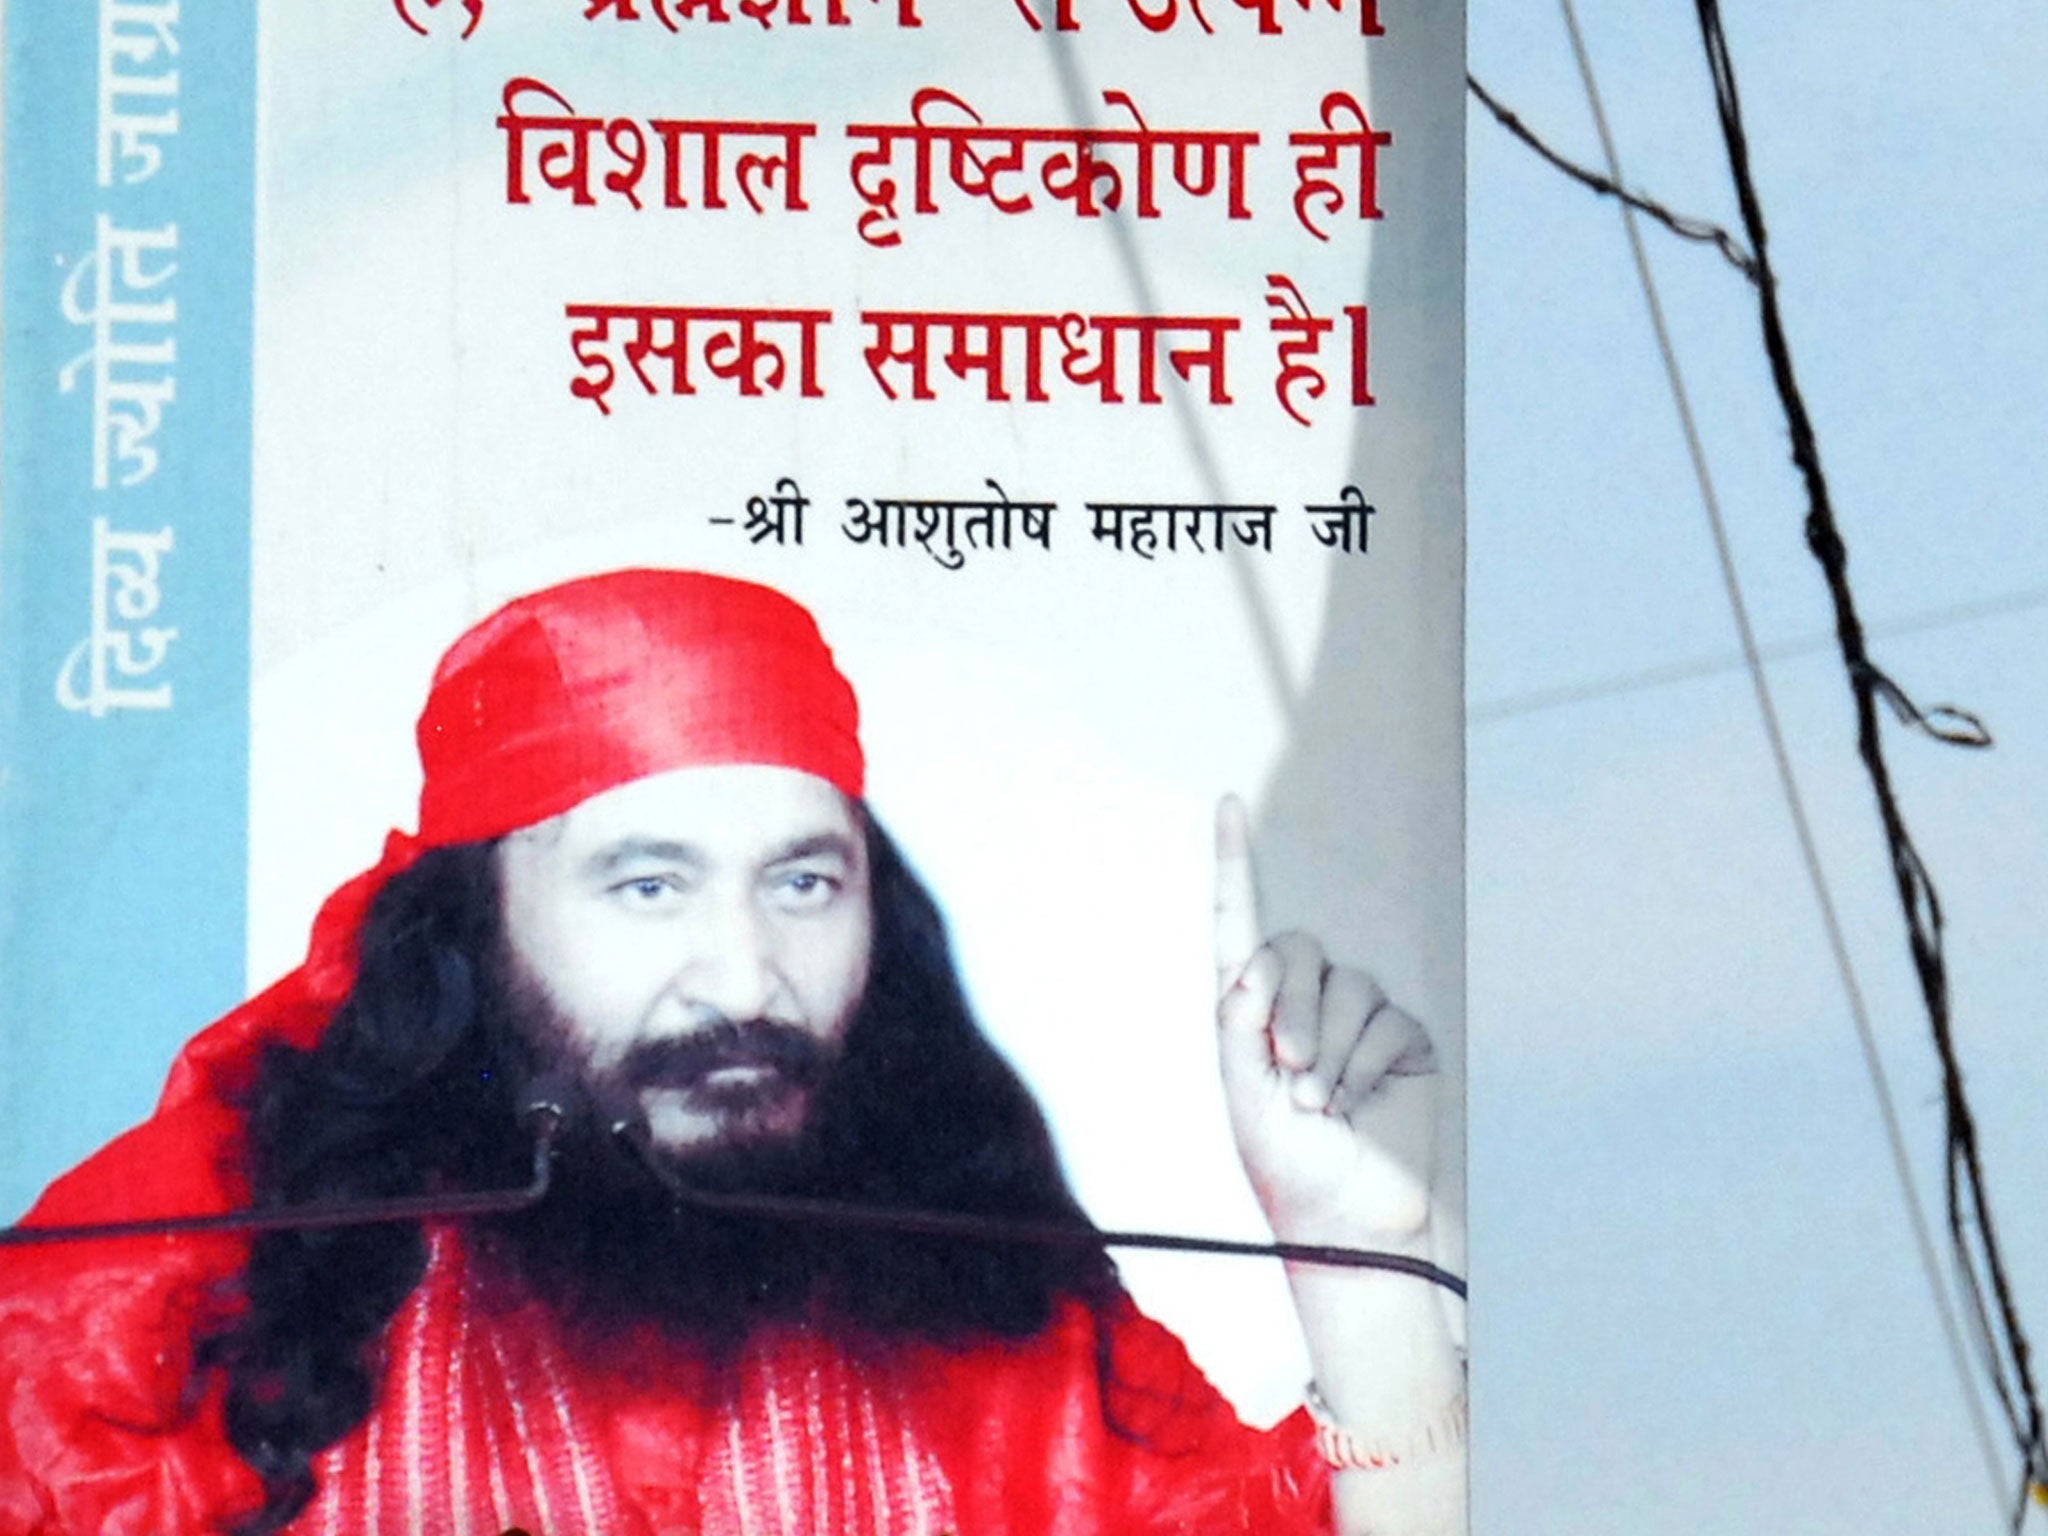 A poster featuring an image of Indian spiritual leader Shri Ashutosh Maharaj stands outside the Divya Jyoti Jagrati Sansthan in Nurmahal on the outskirts of Jalandhar on 11 March, 2014